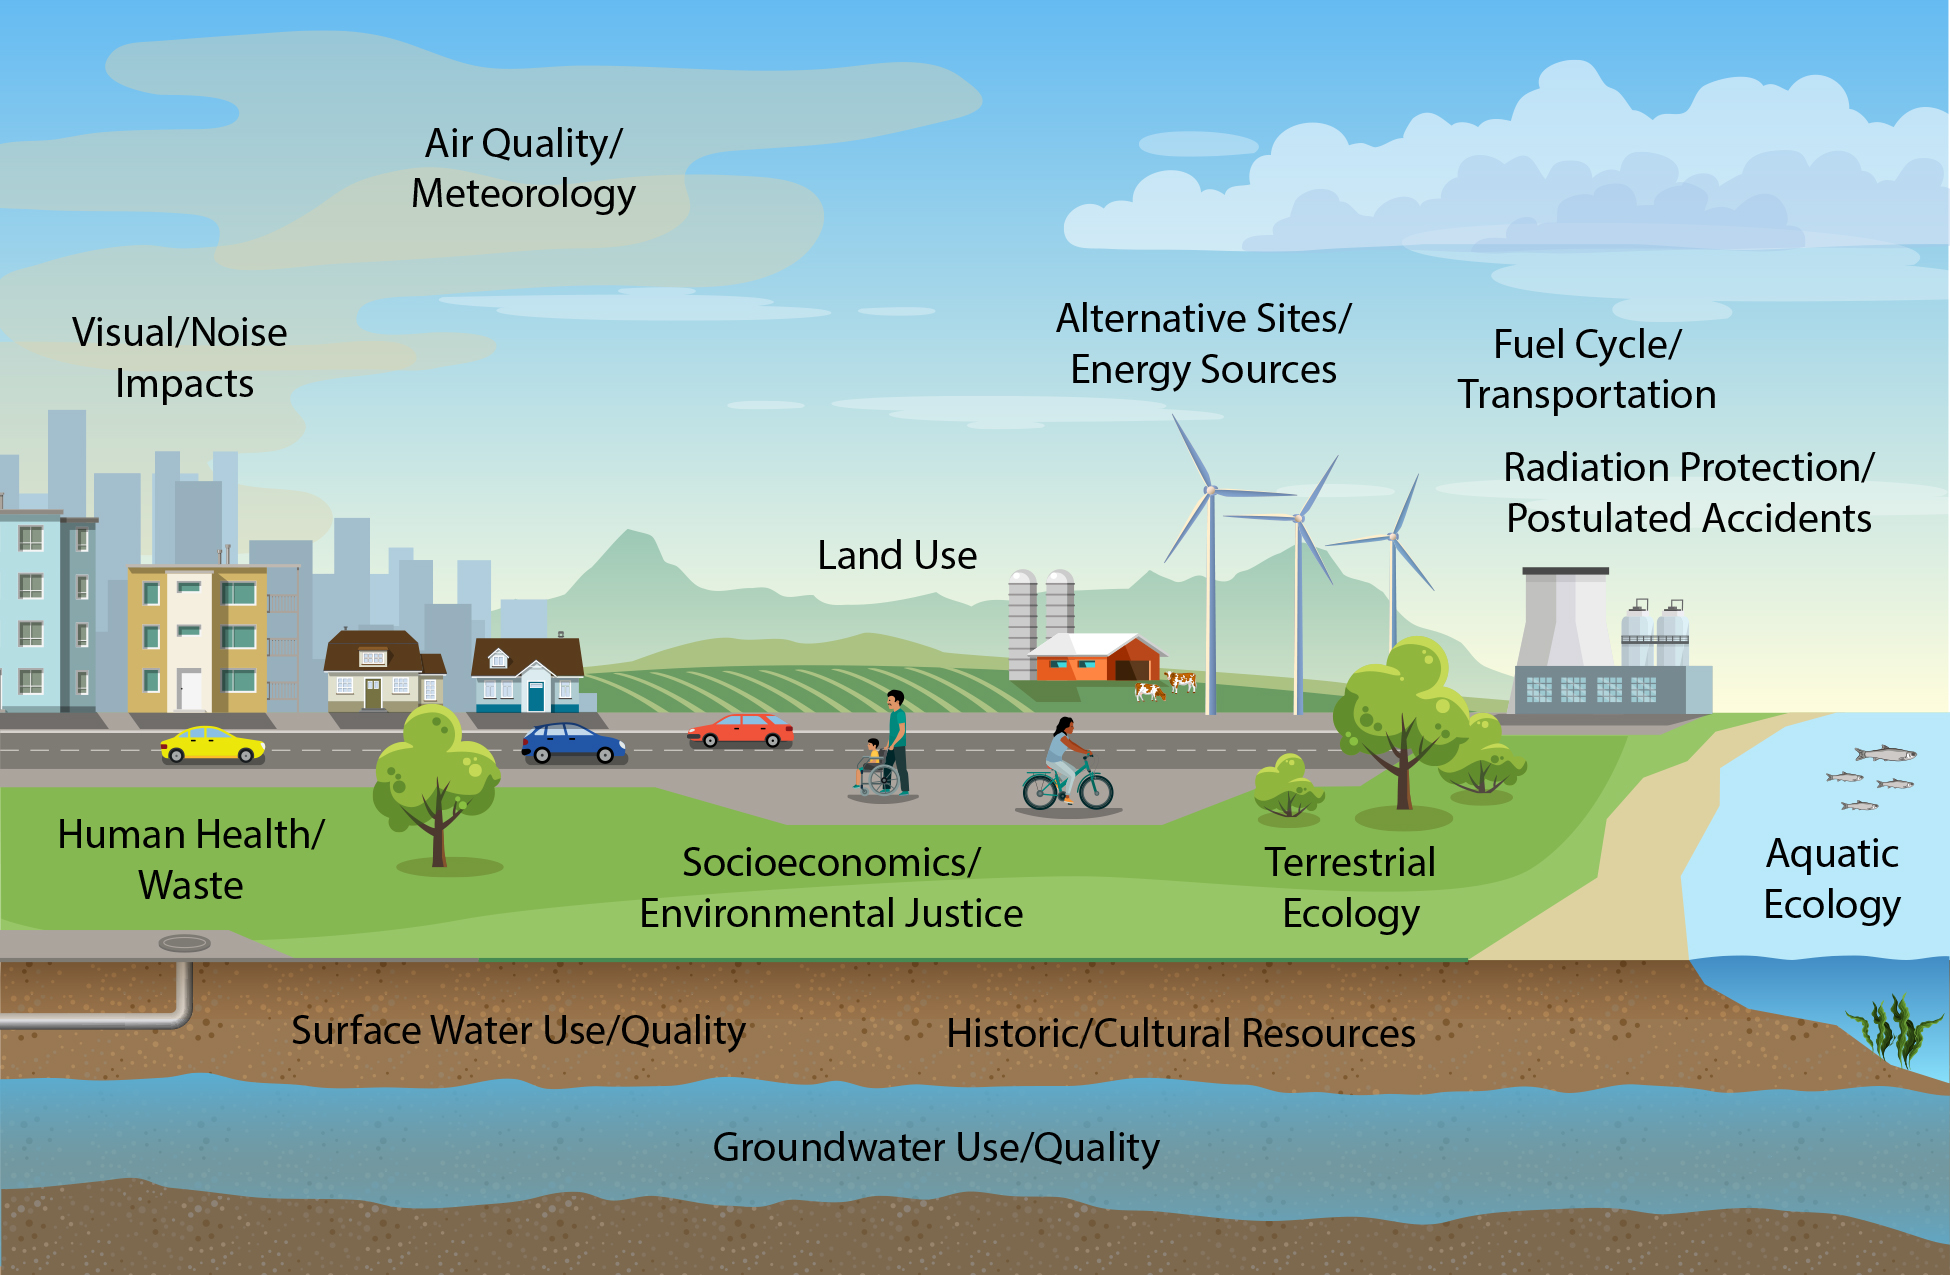 An illustration of the environmental factors considered in the NRC environmental review process, including a city, sky, shoreline, groundwater, people and animals.